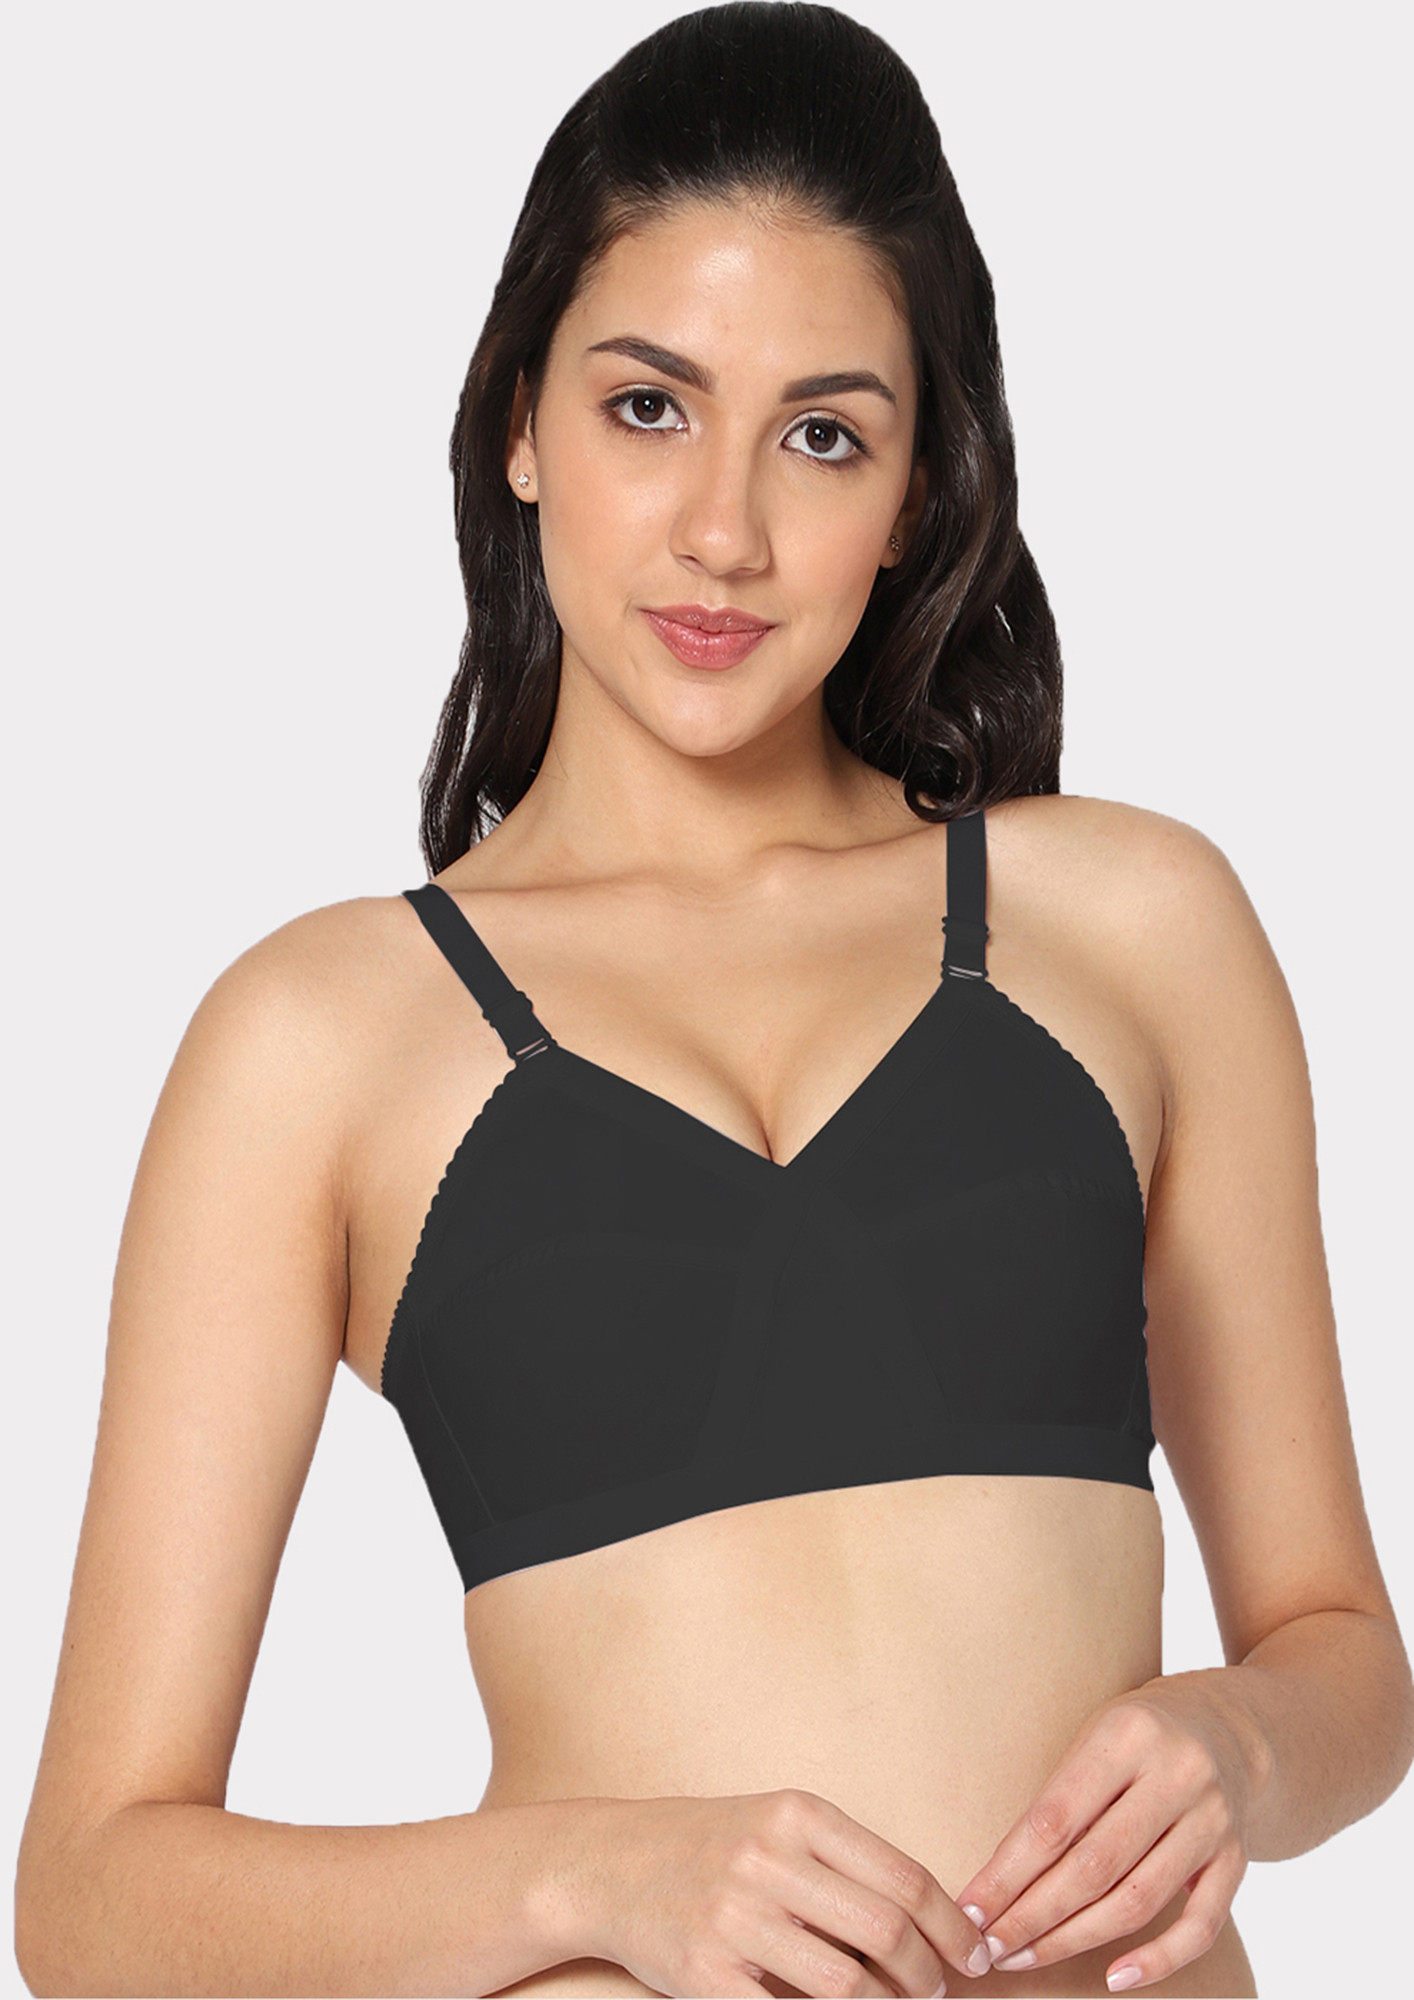 Buy online Black Cotton Sports Bra from lingerie for Women by